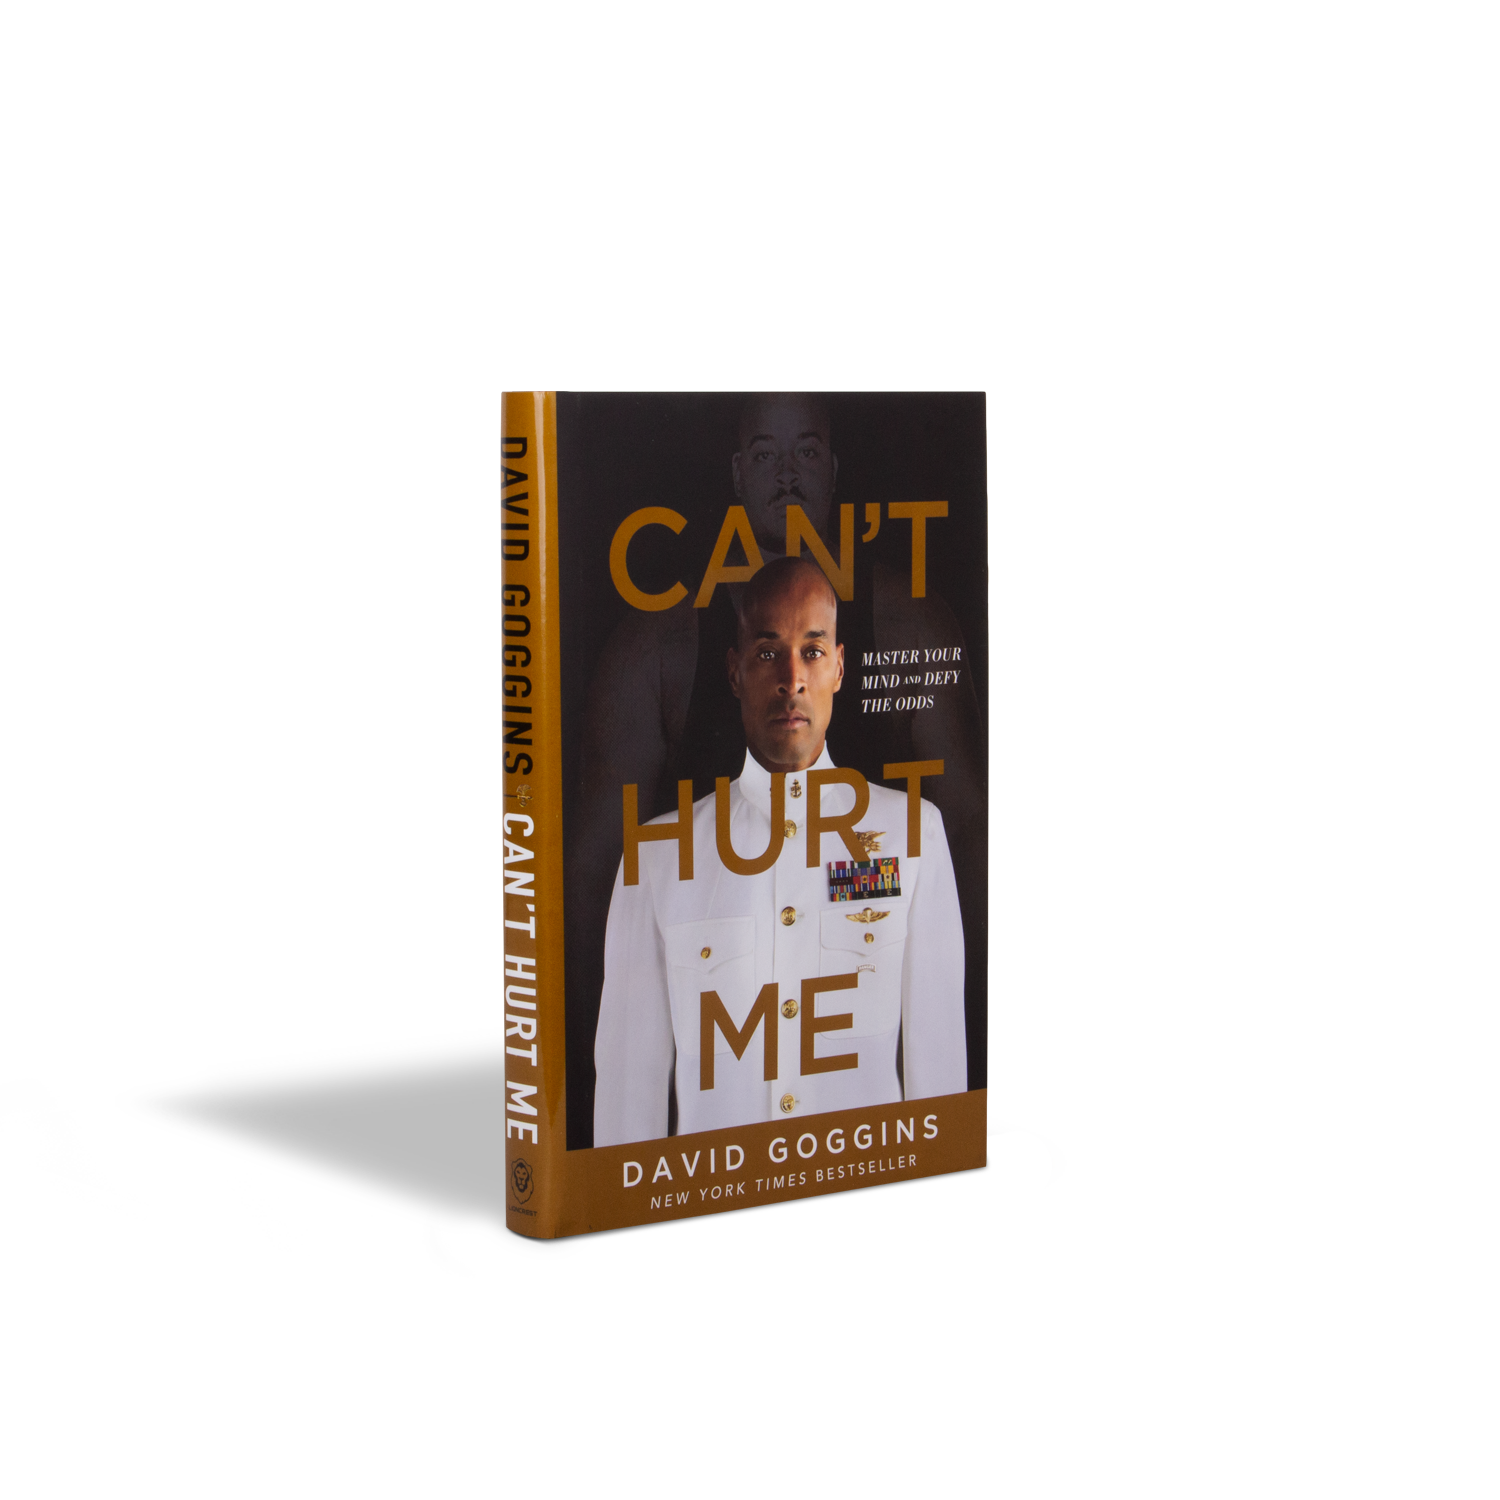 Can't Hurt Me by David Goggins